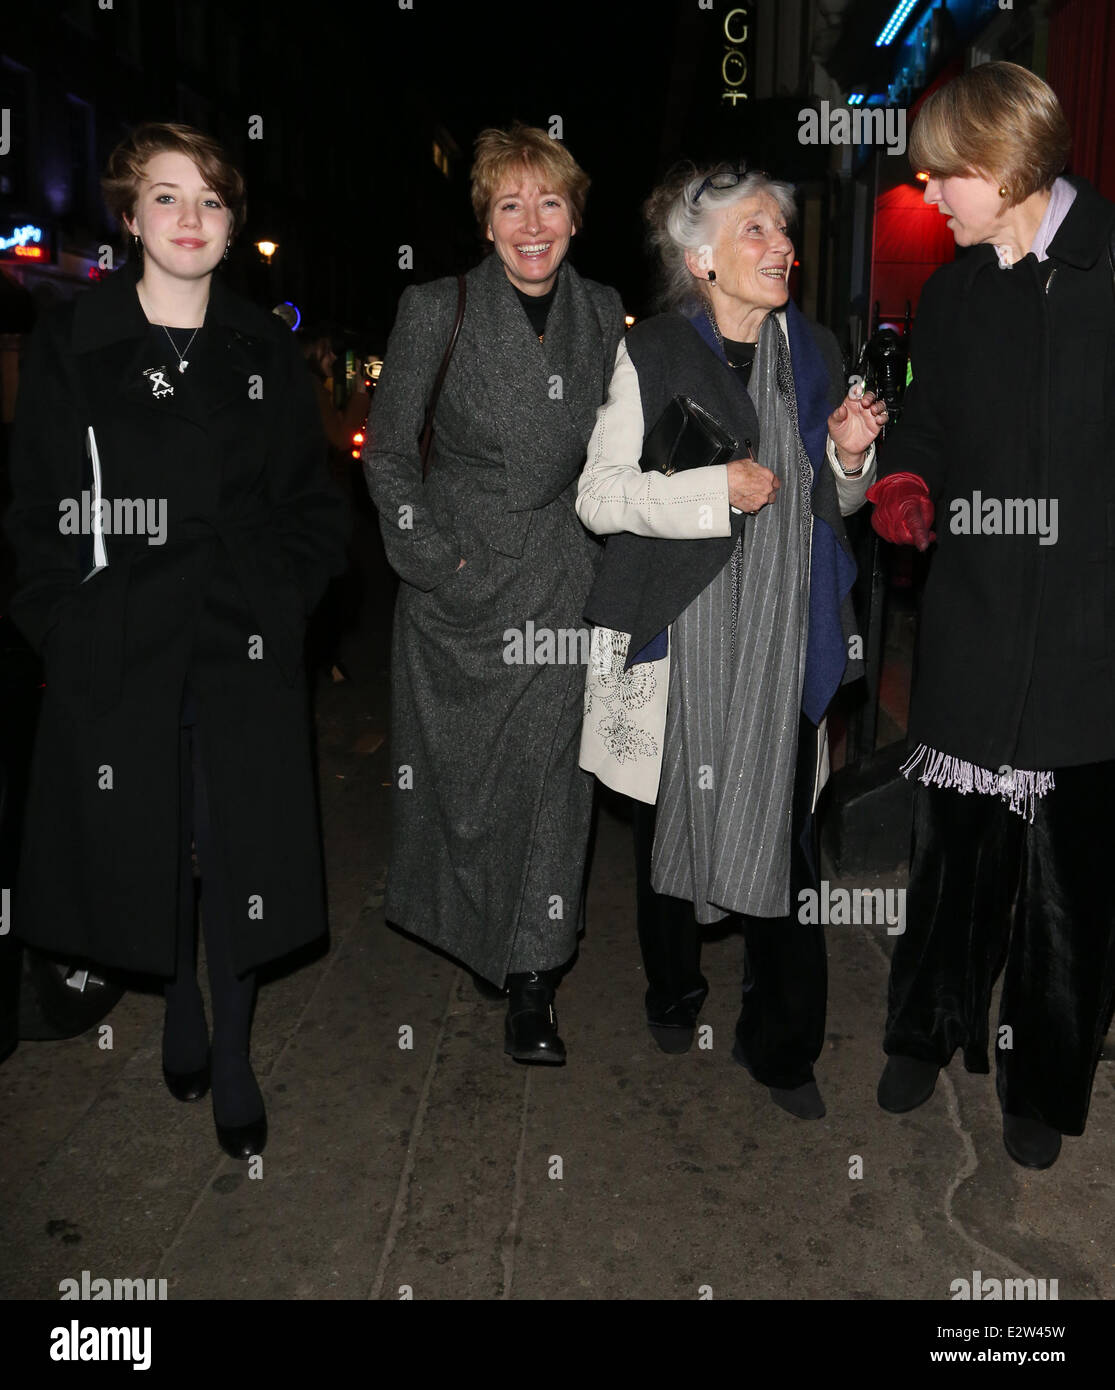 Emma Thompson with her mother Phyllida Law and daughter Gaia Wise out and about in Soho  Featuring: Emma Thompson,Phyllida Law,Gaia Wise Where: London, United Kingdom When: 04 Mar 2013 Stock Photo